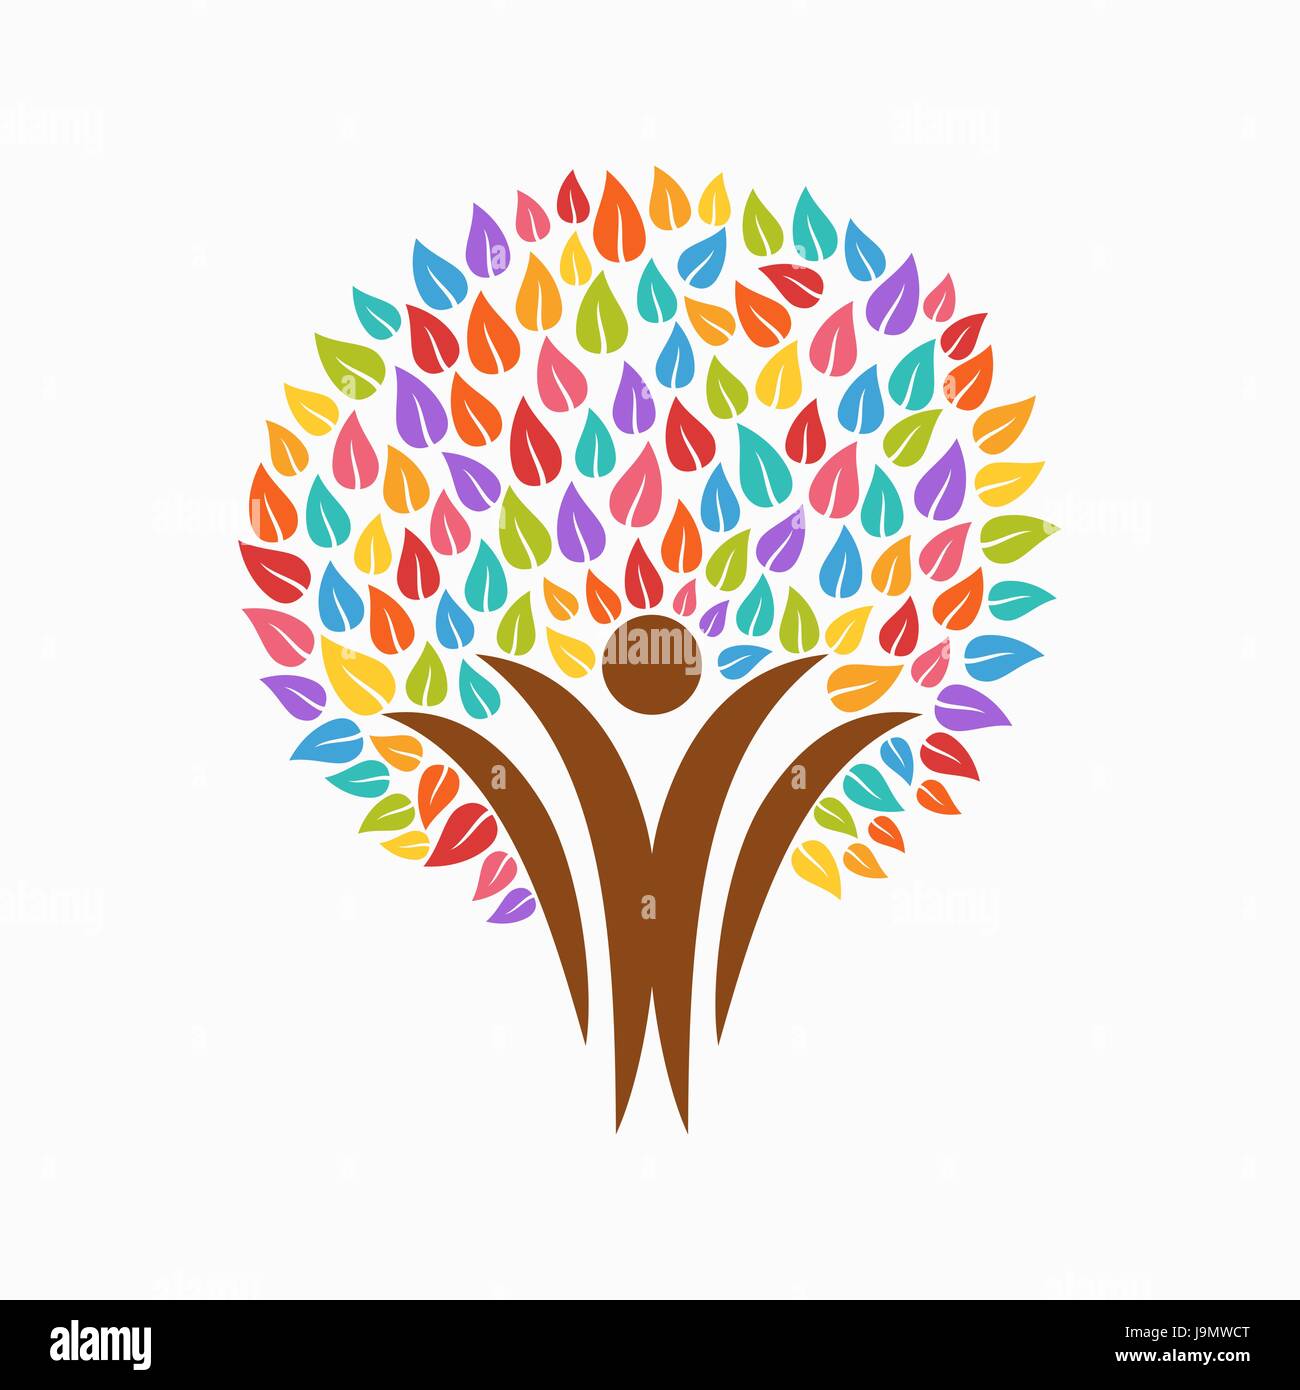 Colorful tree symbol with people silhouettes. Concept illustration for organization help, environment project or social work. EPS10 vector. Stock Vector